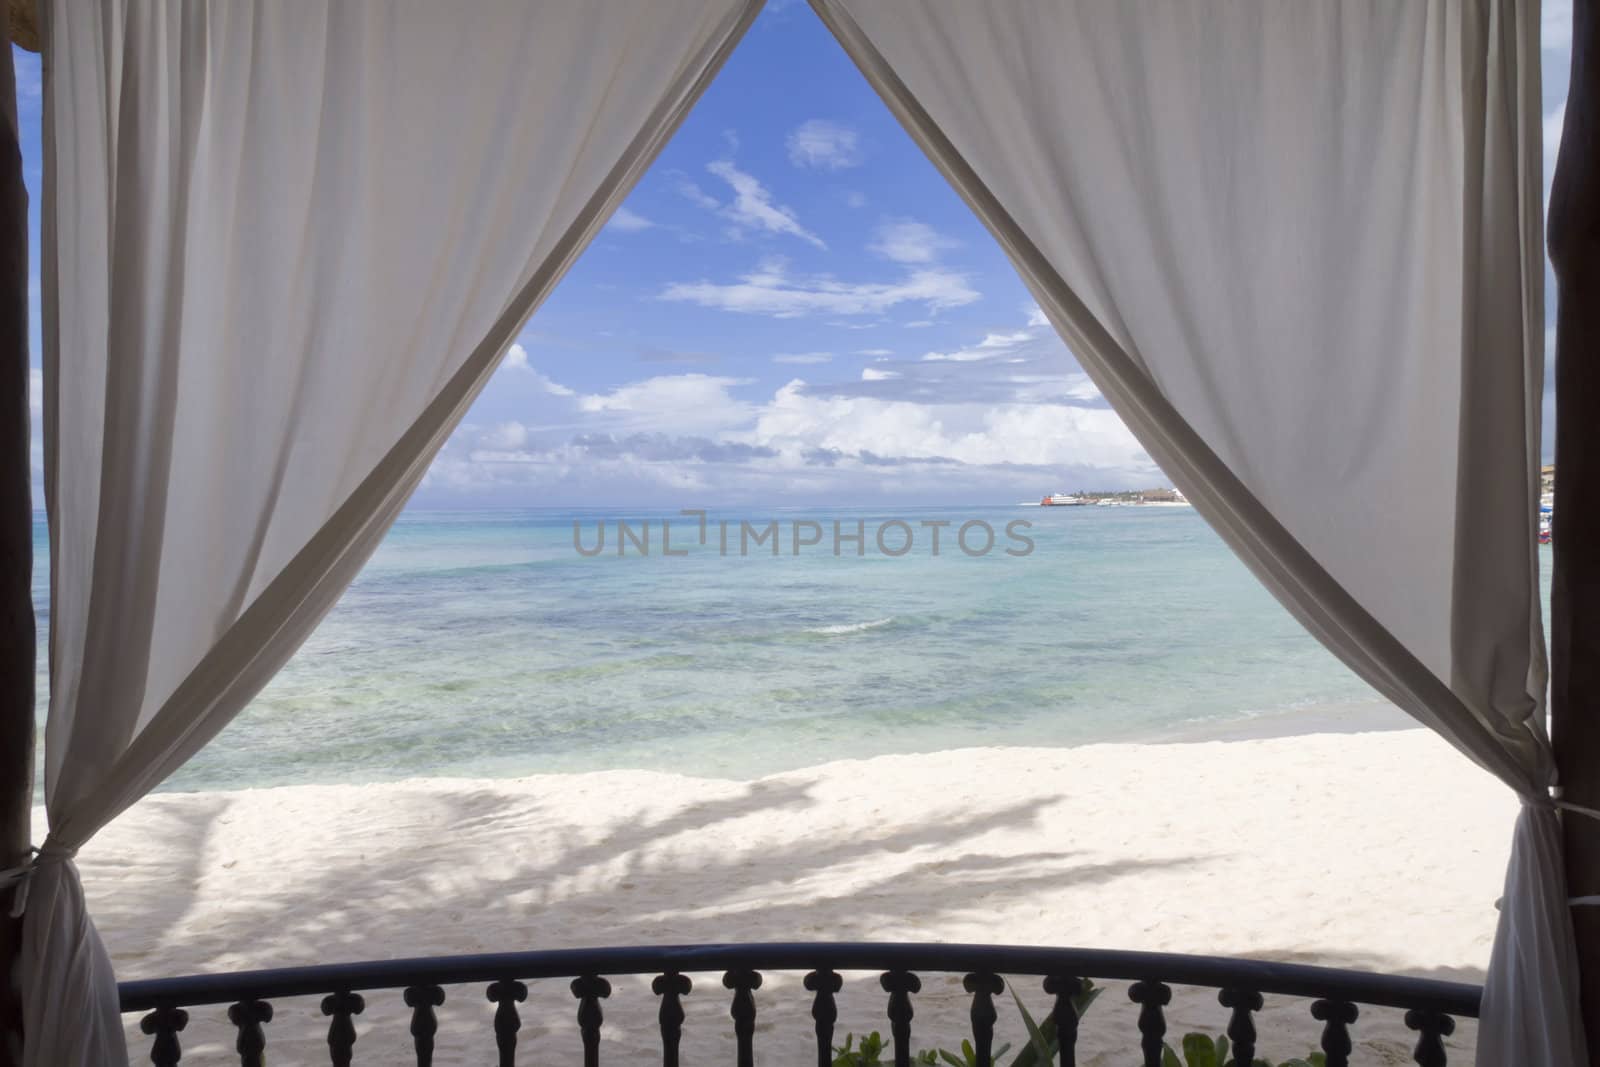 A framed view of the beach and tropical ocean